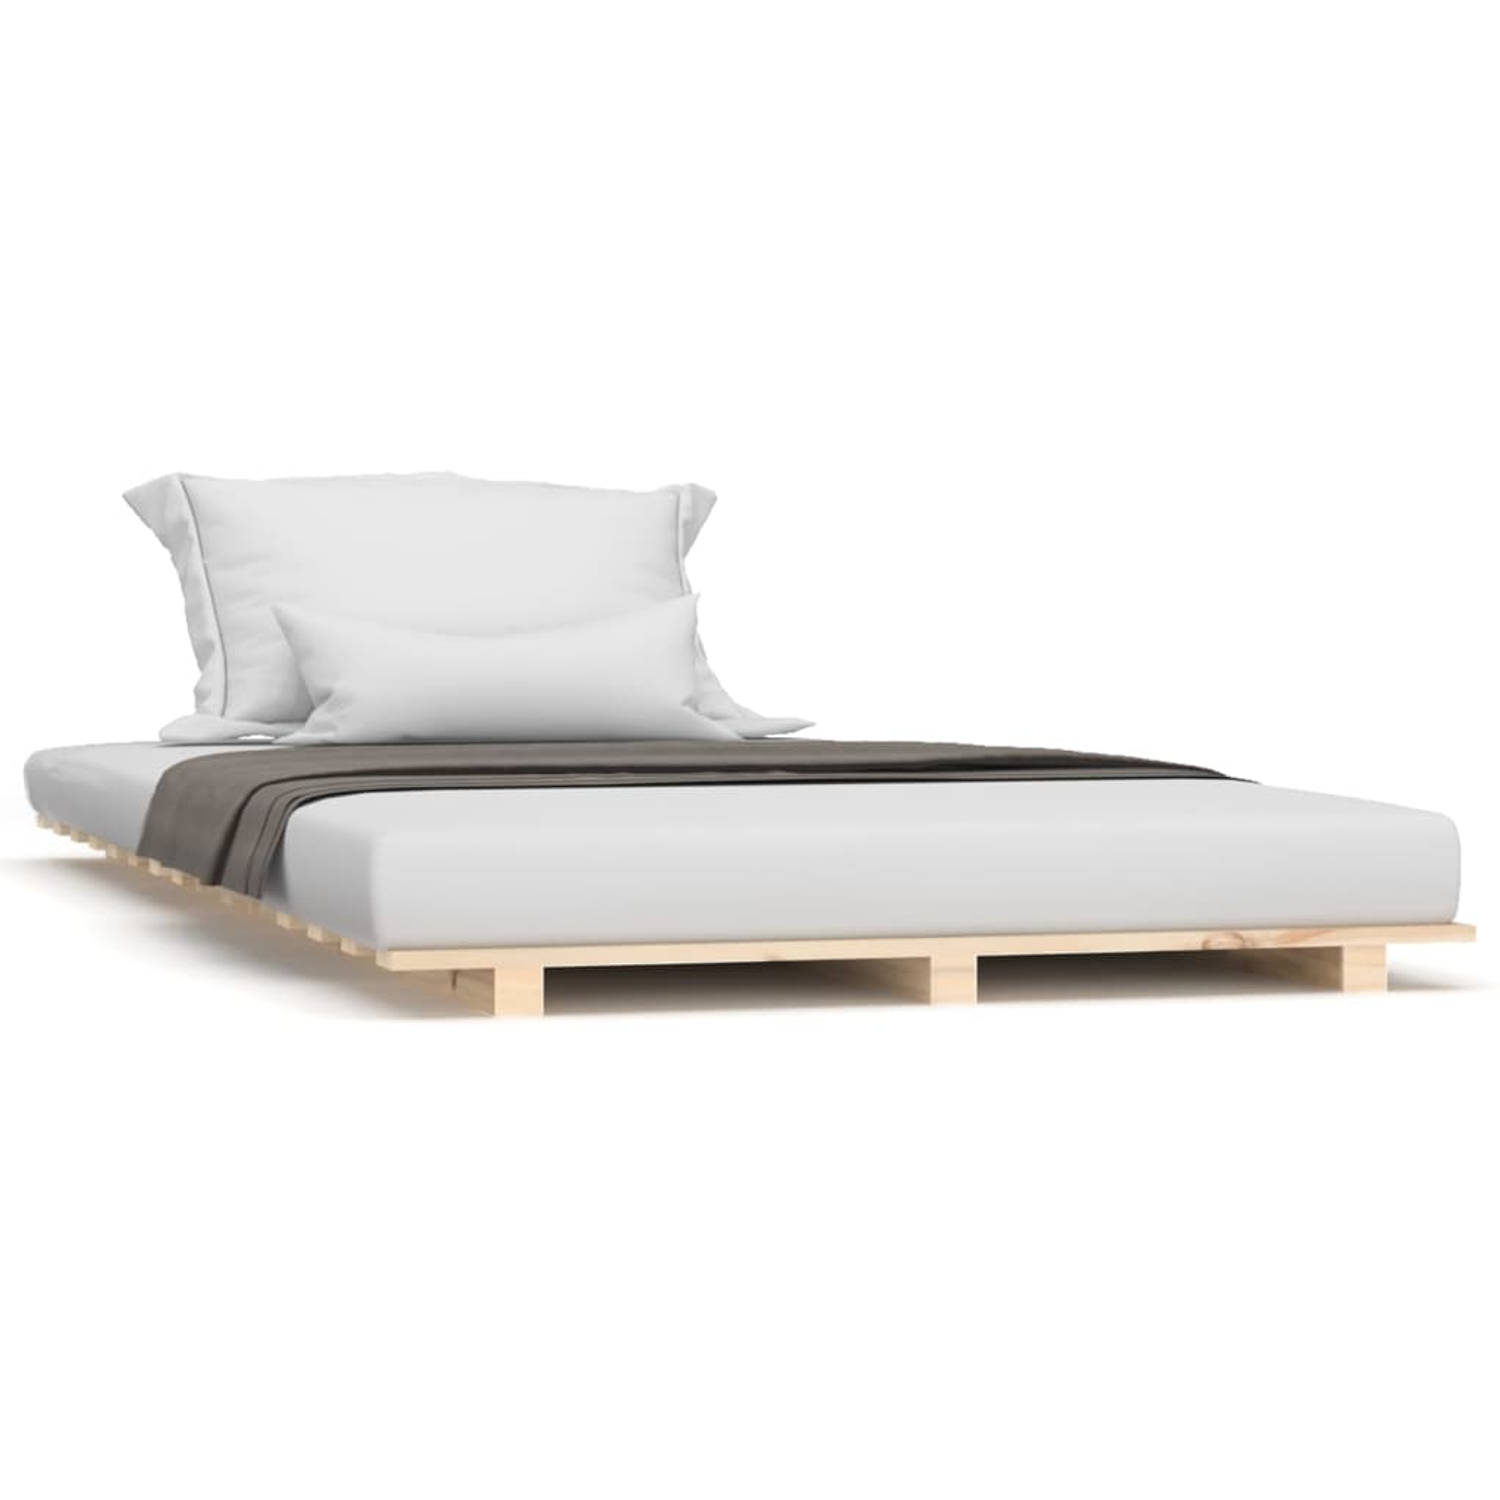 The Living Store Bedframe massief grenenhout 100x200 cm - Bed